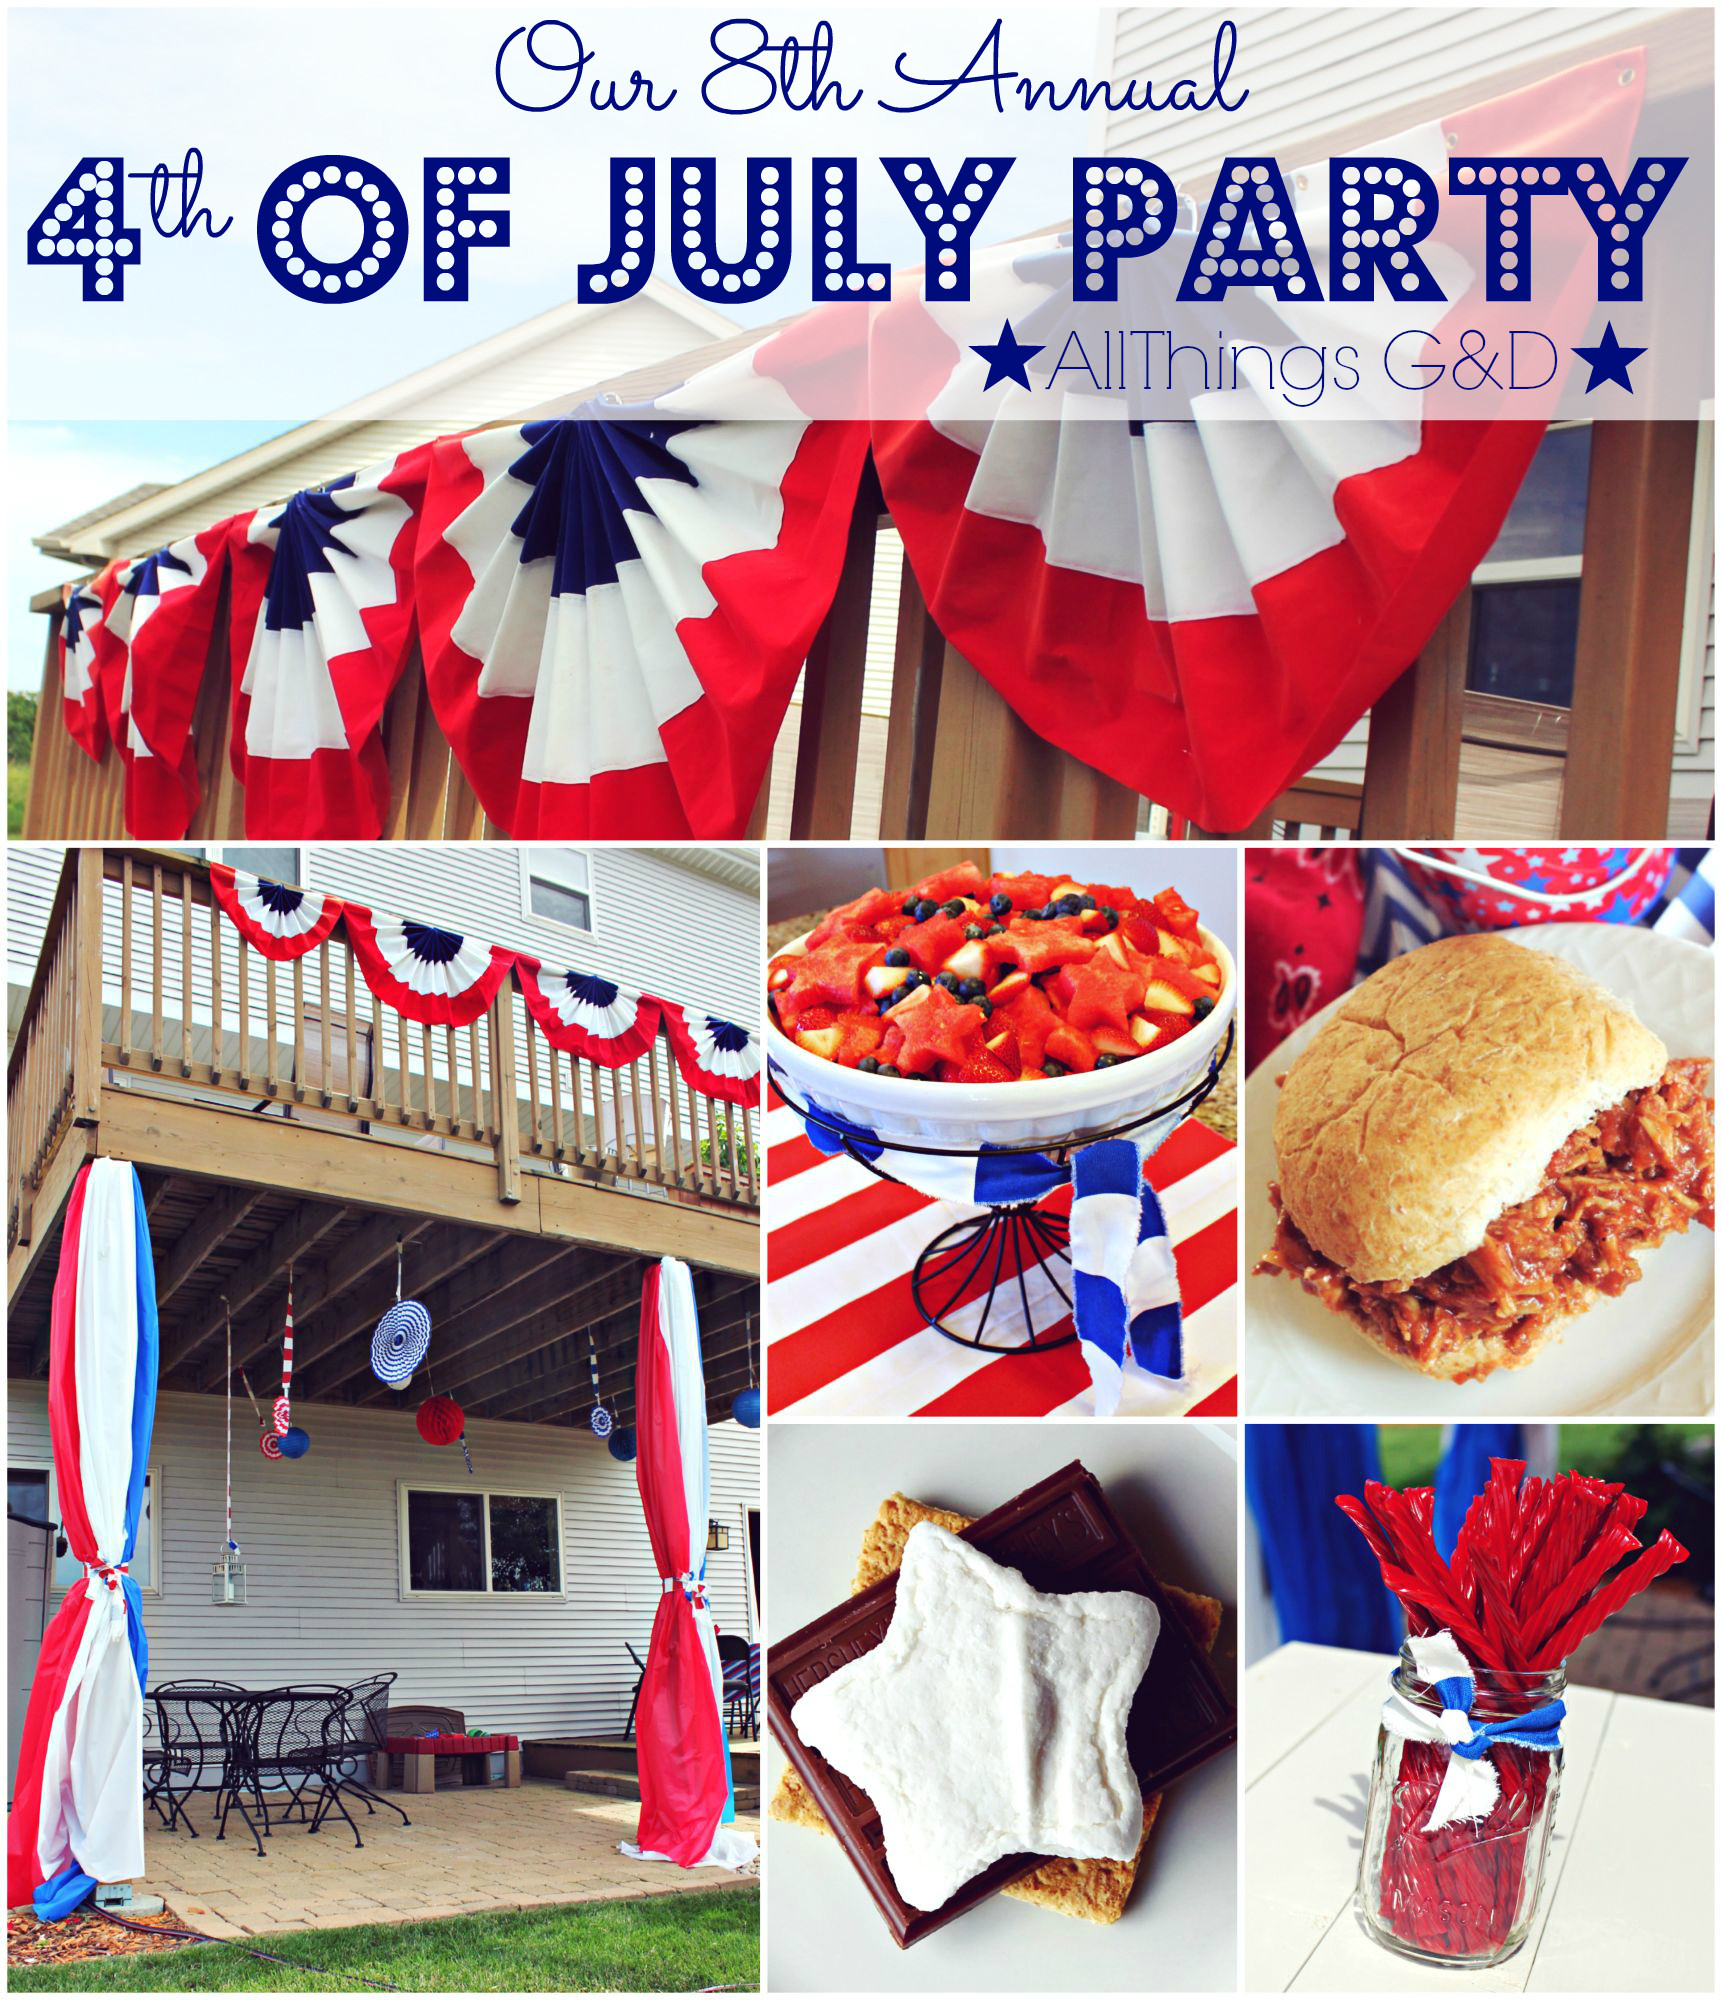 4th Of July Party
 Our 8th Annual 4th of July Party All Things G&D